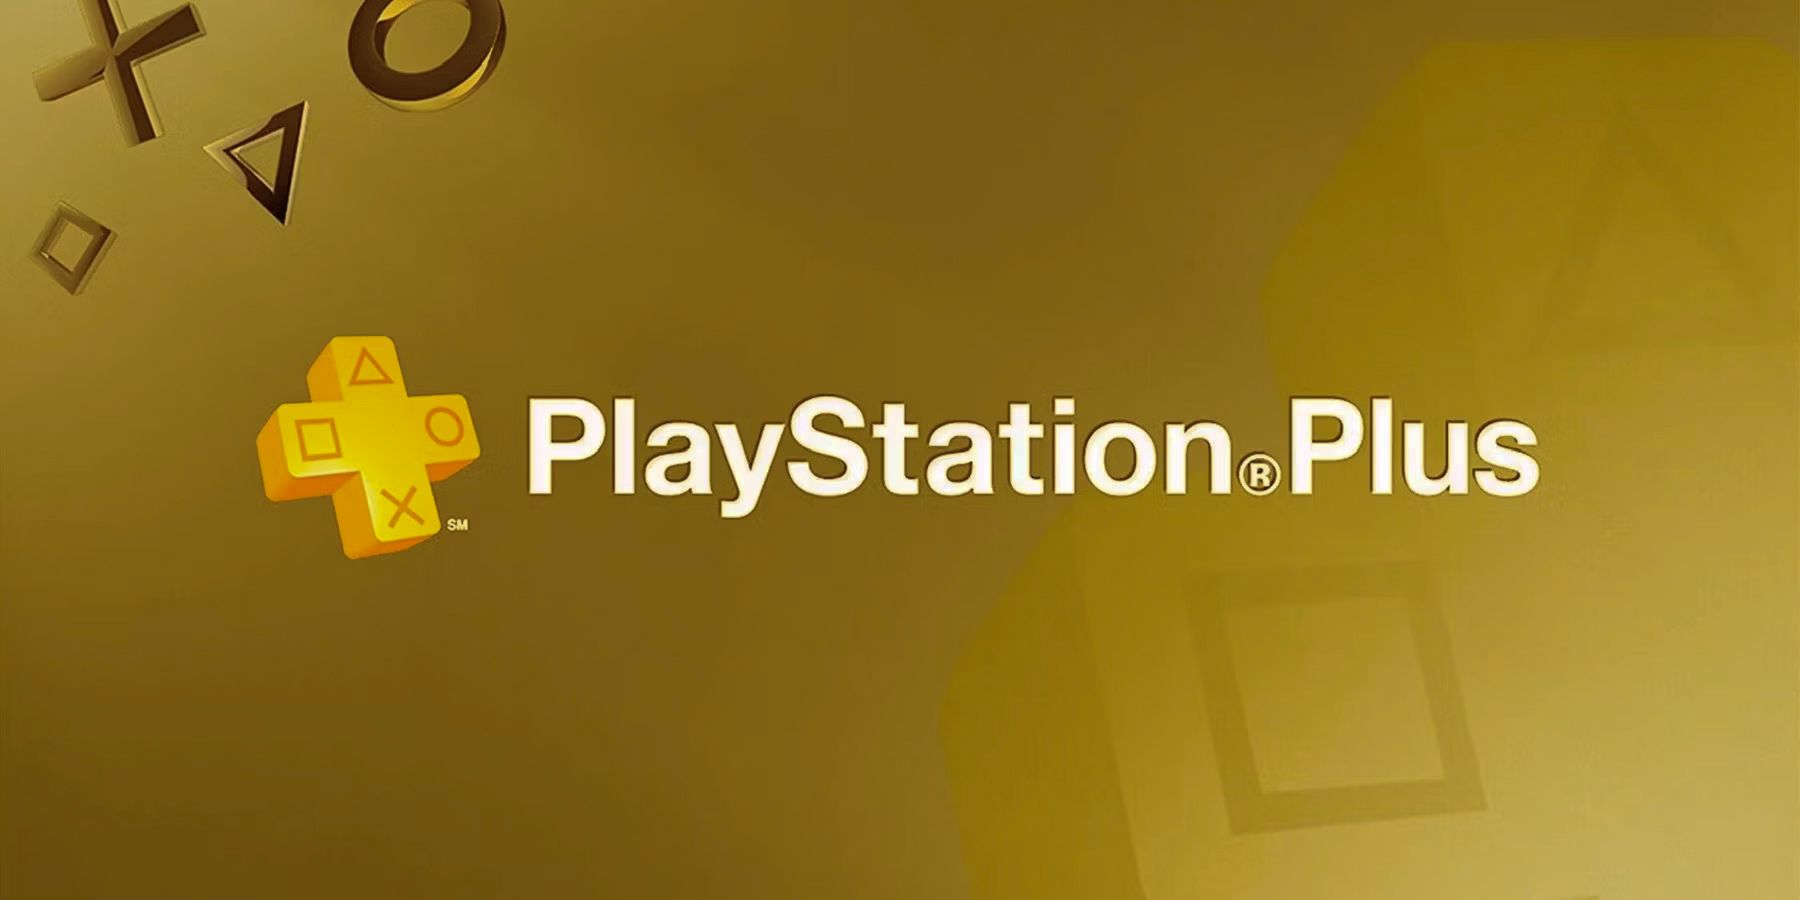 Why PS Plus Fans Should Keep an Eye on March 13